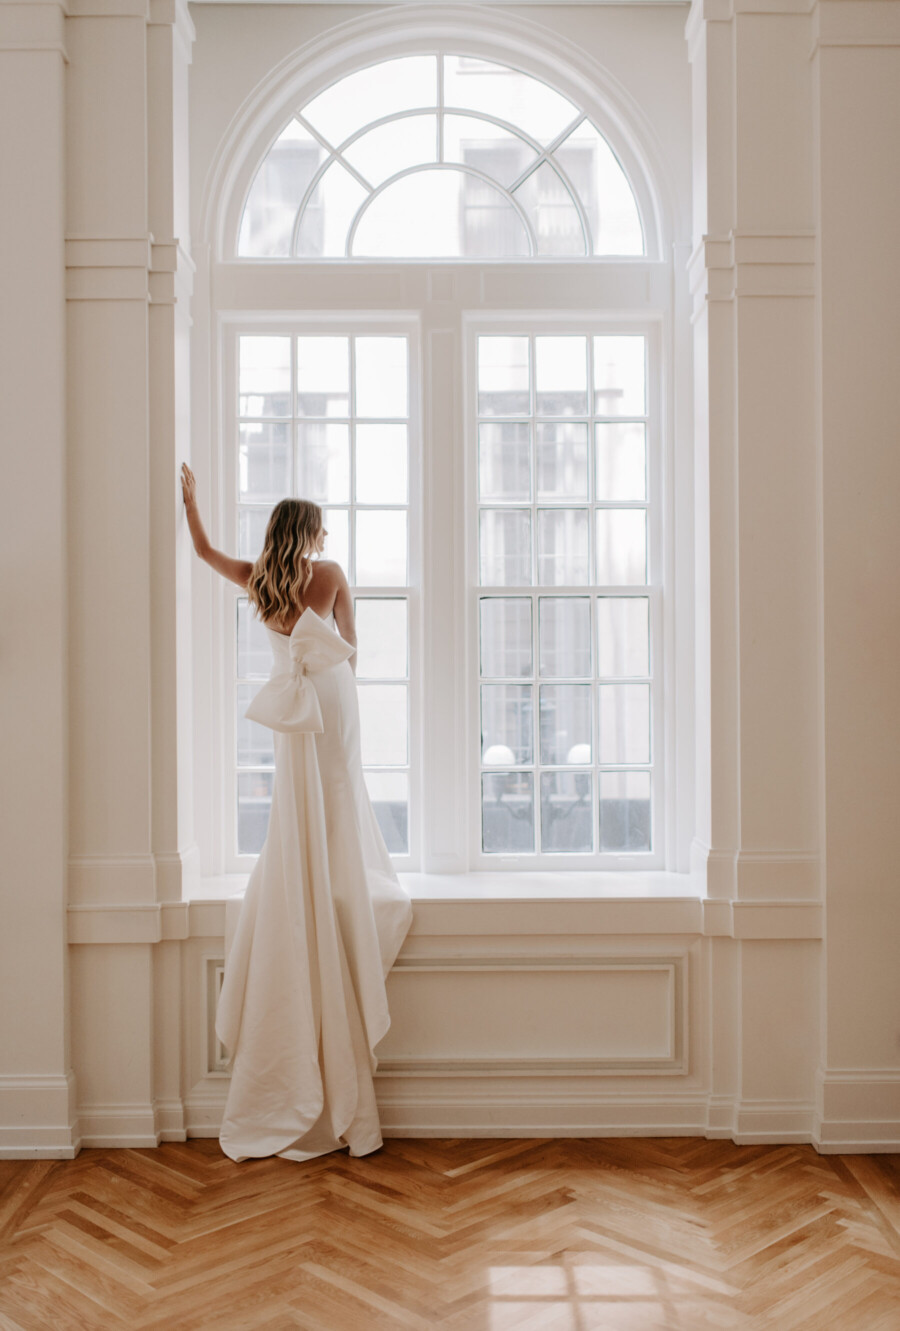 Reasons Why You Should Buy Your Wedding Dress from a Small Business